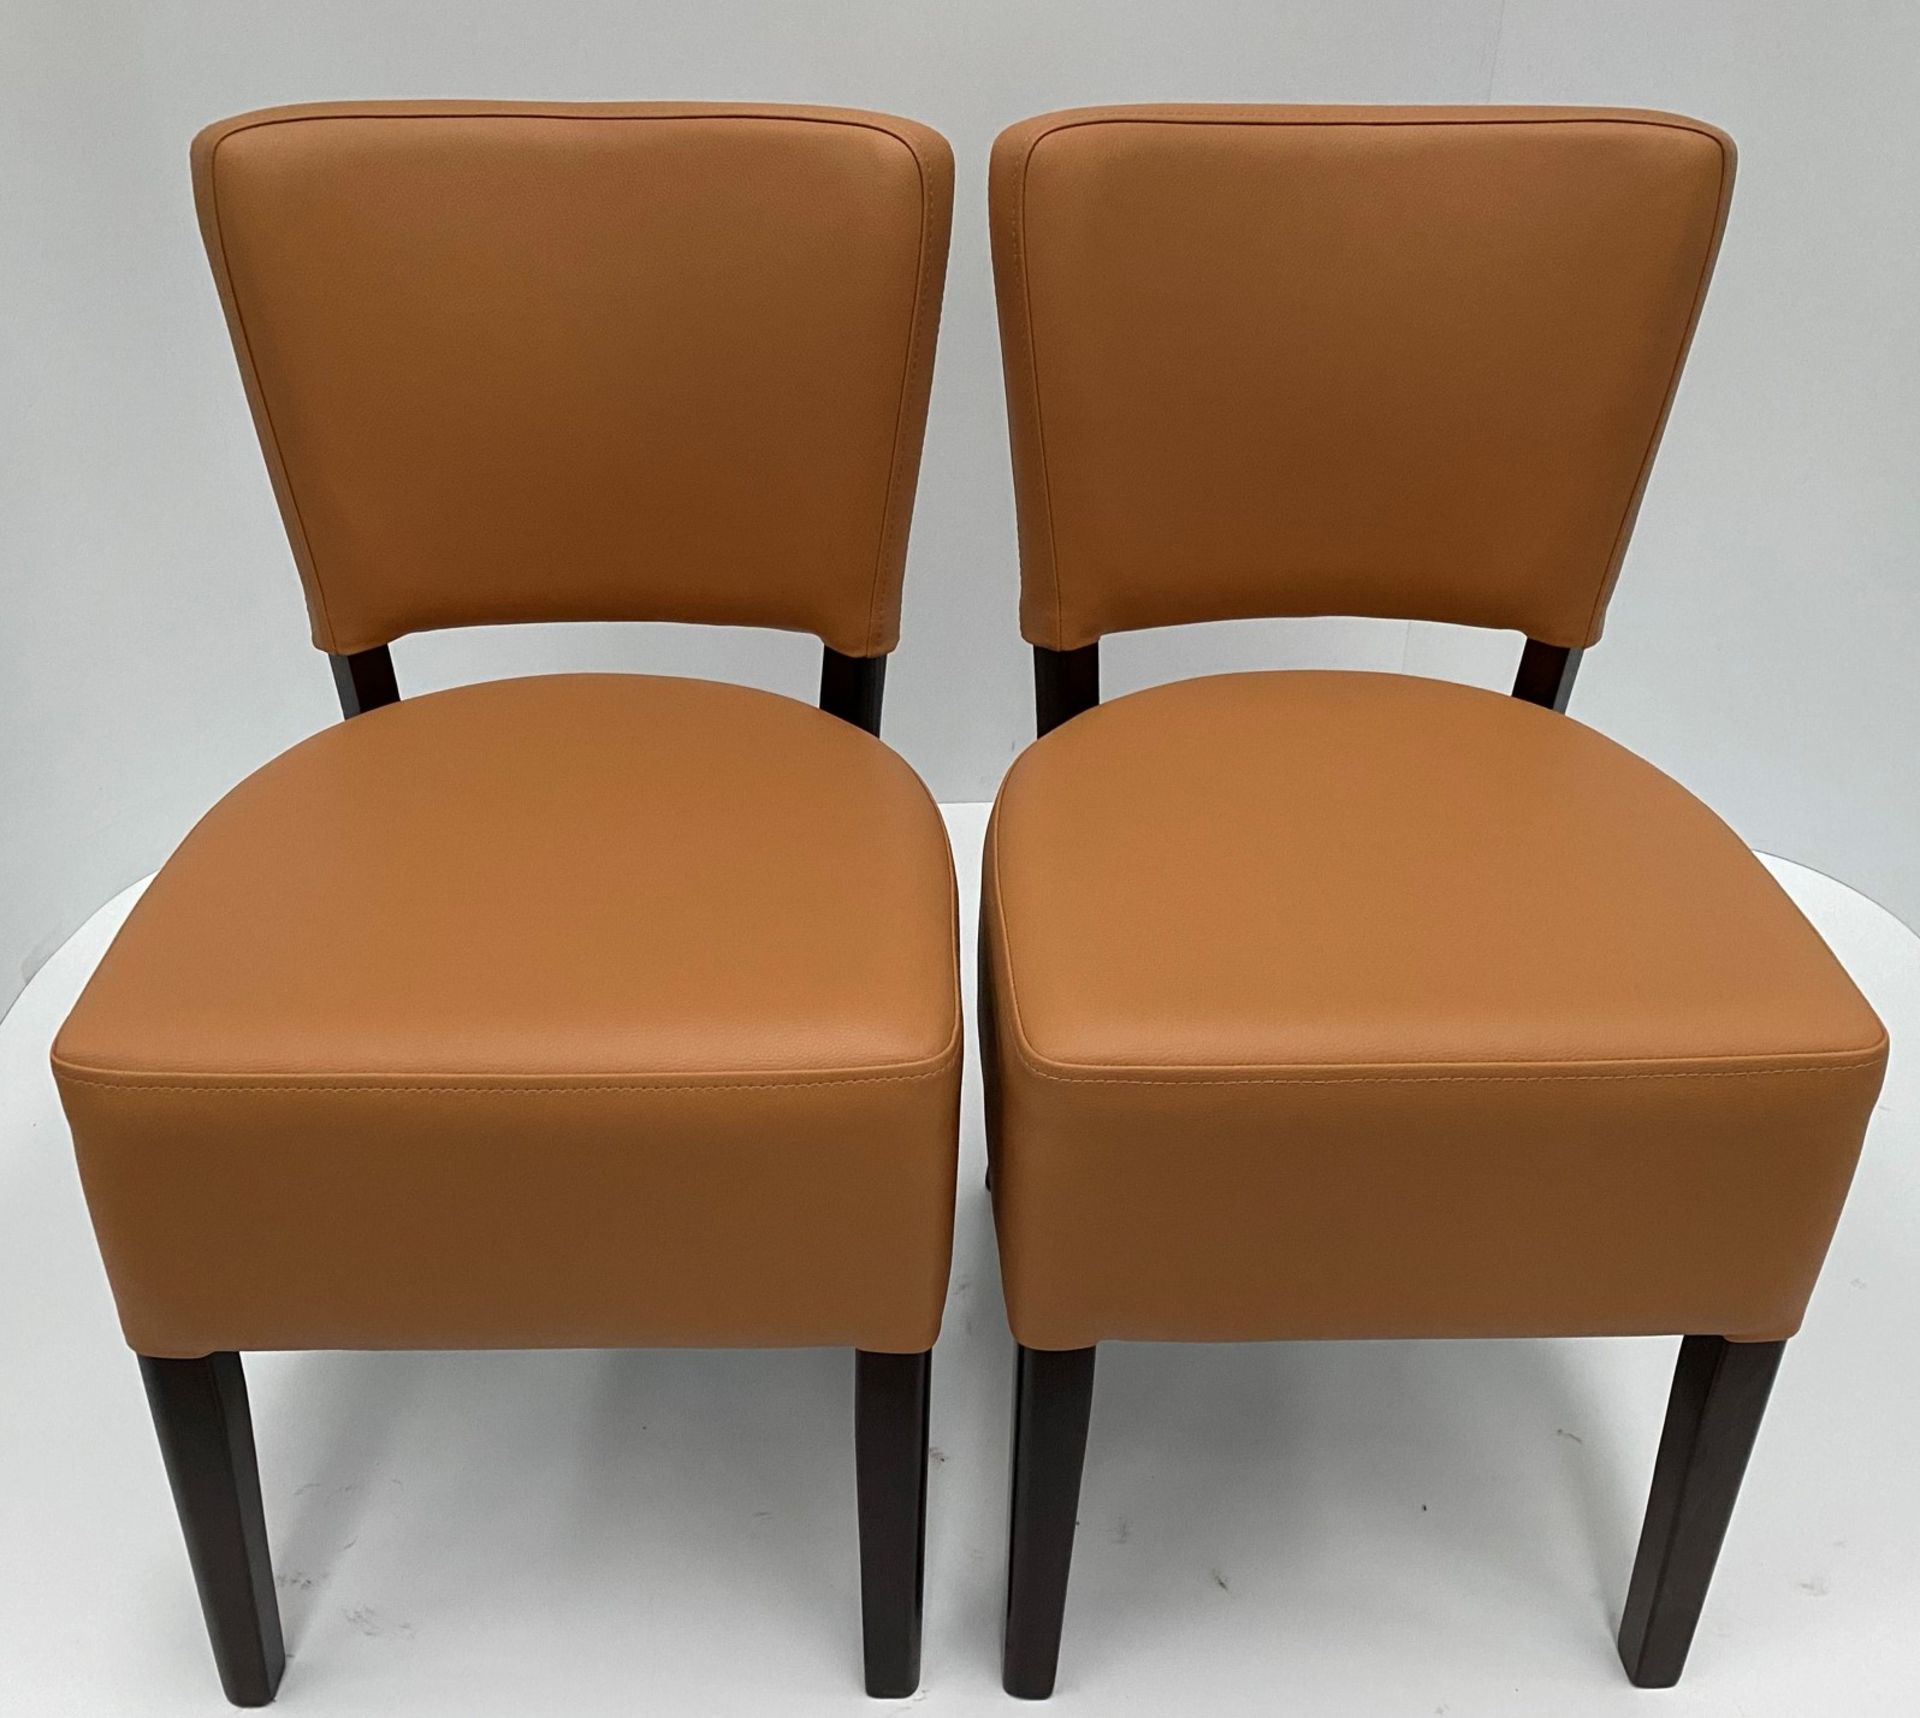 2 x Memphis Vena BR-4 Brown side/dining chairs with walnut coloured frames